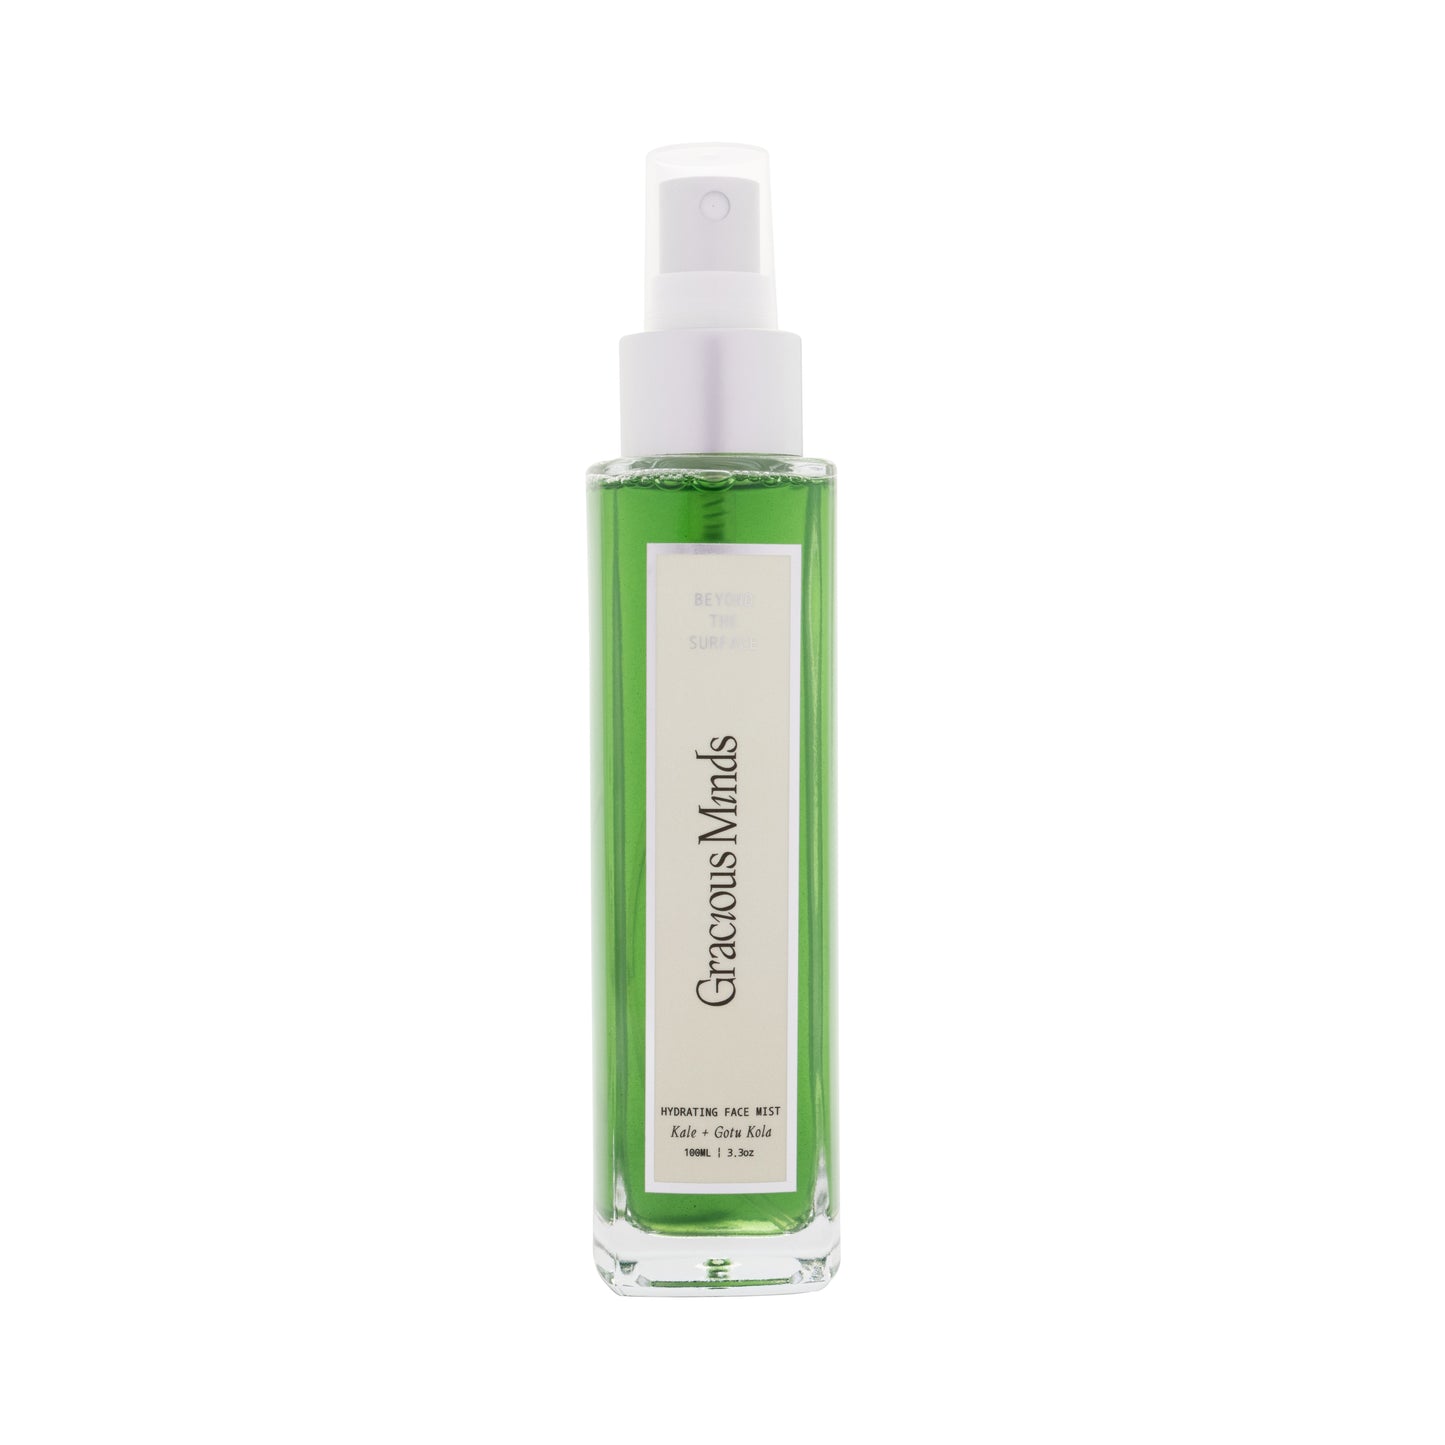 Beyond the Surface hydrating face/body mist